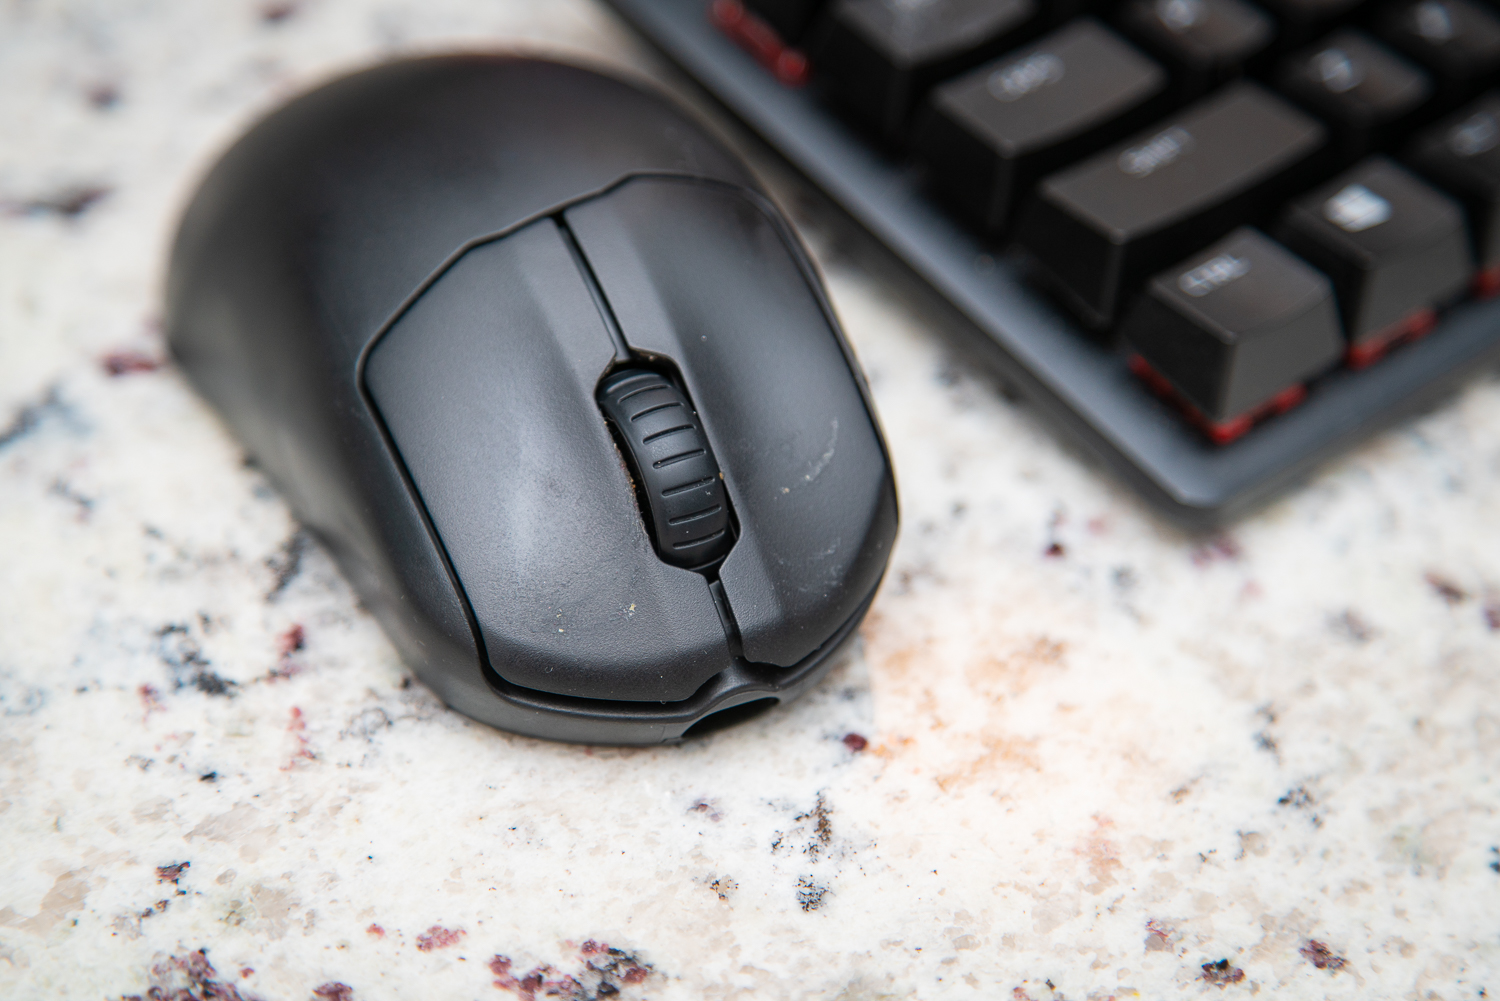  How to deep clean your keyboard and mouse